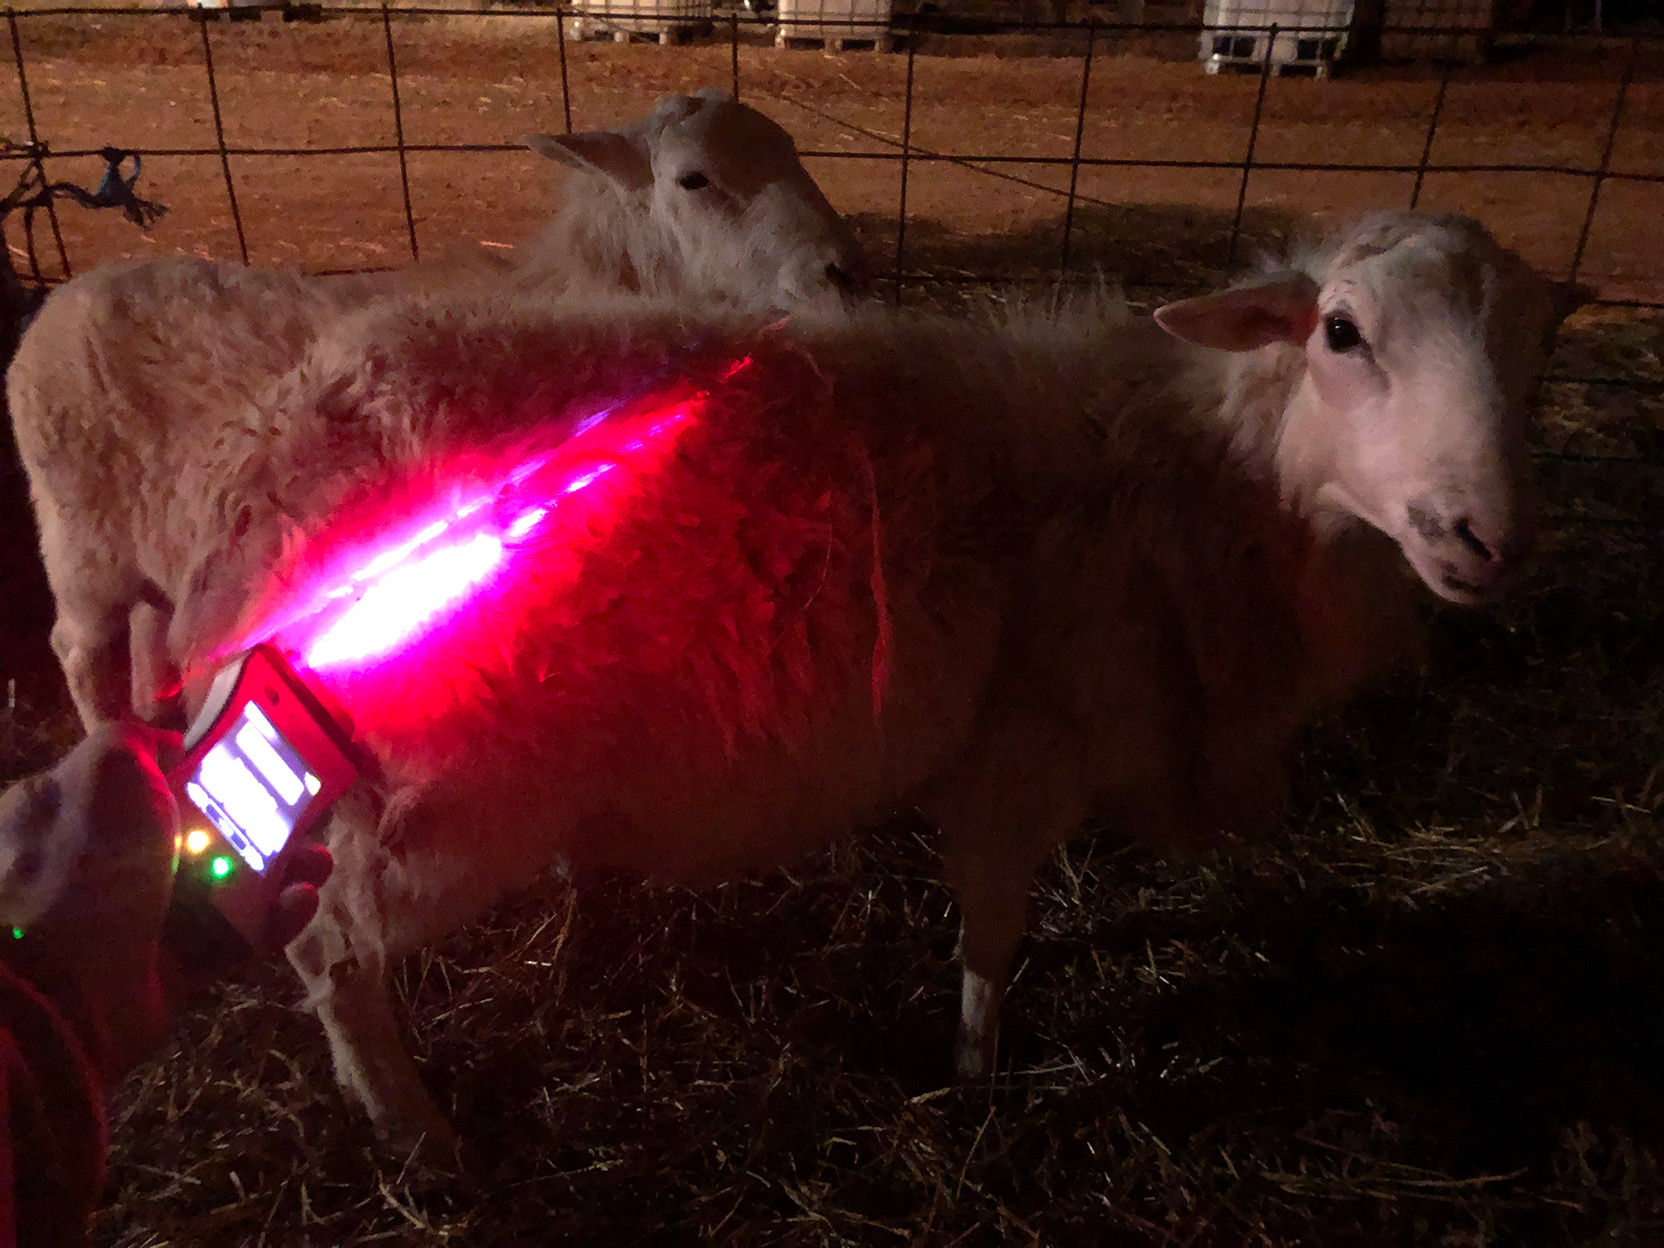 Sheep in a barn with laser shining on hindlimbs